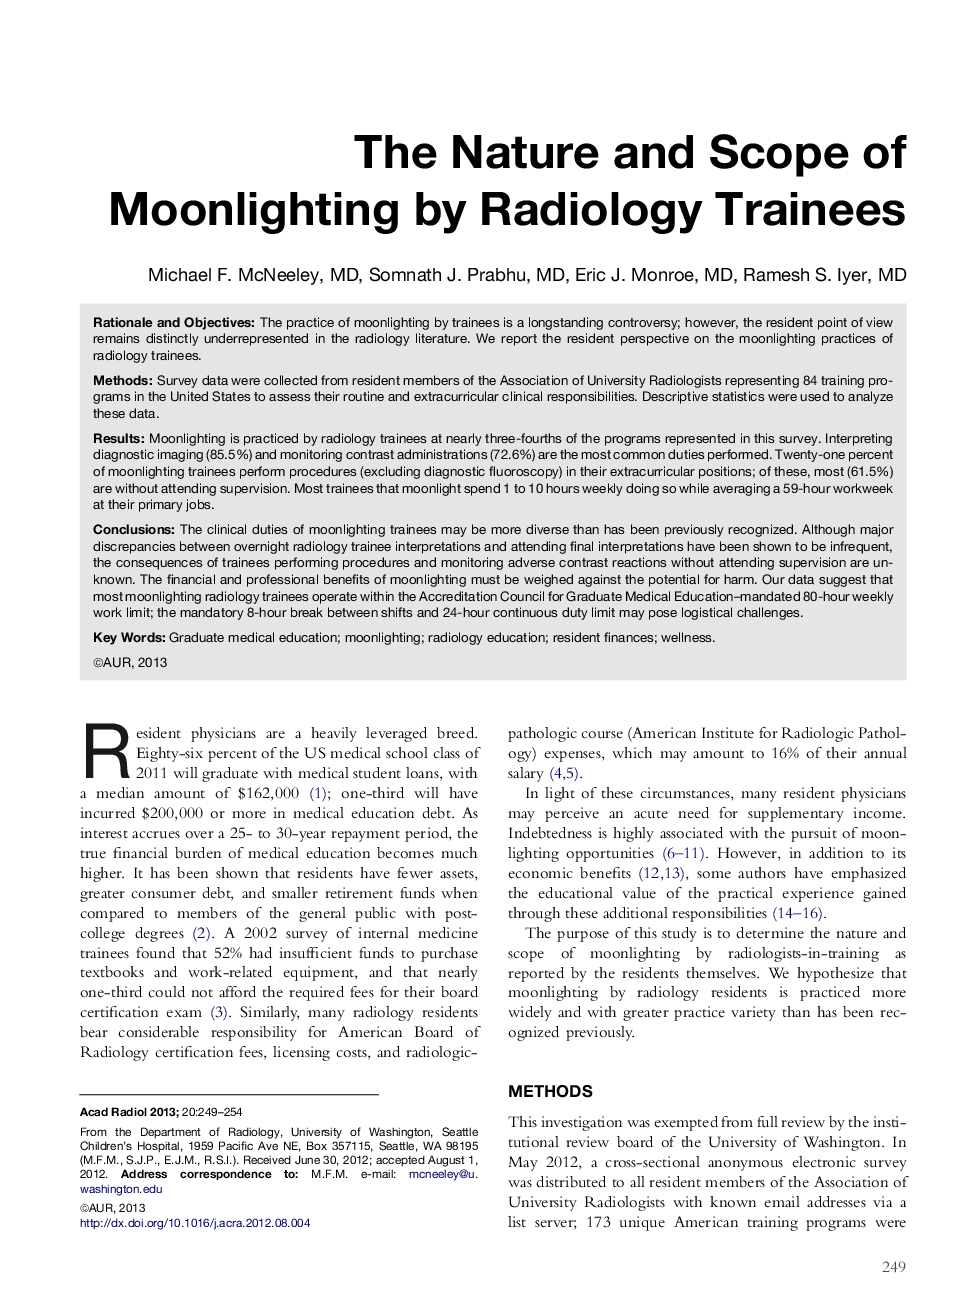 The Nature and Scope of Moonlighting by Radiology Trainees